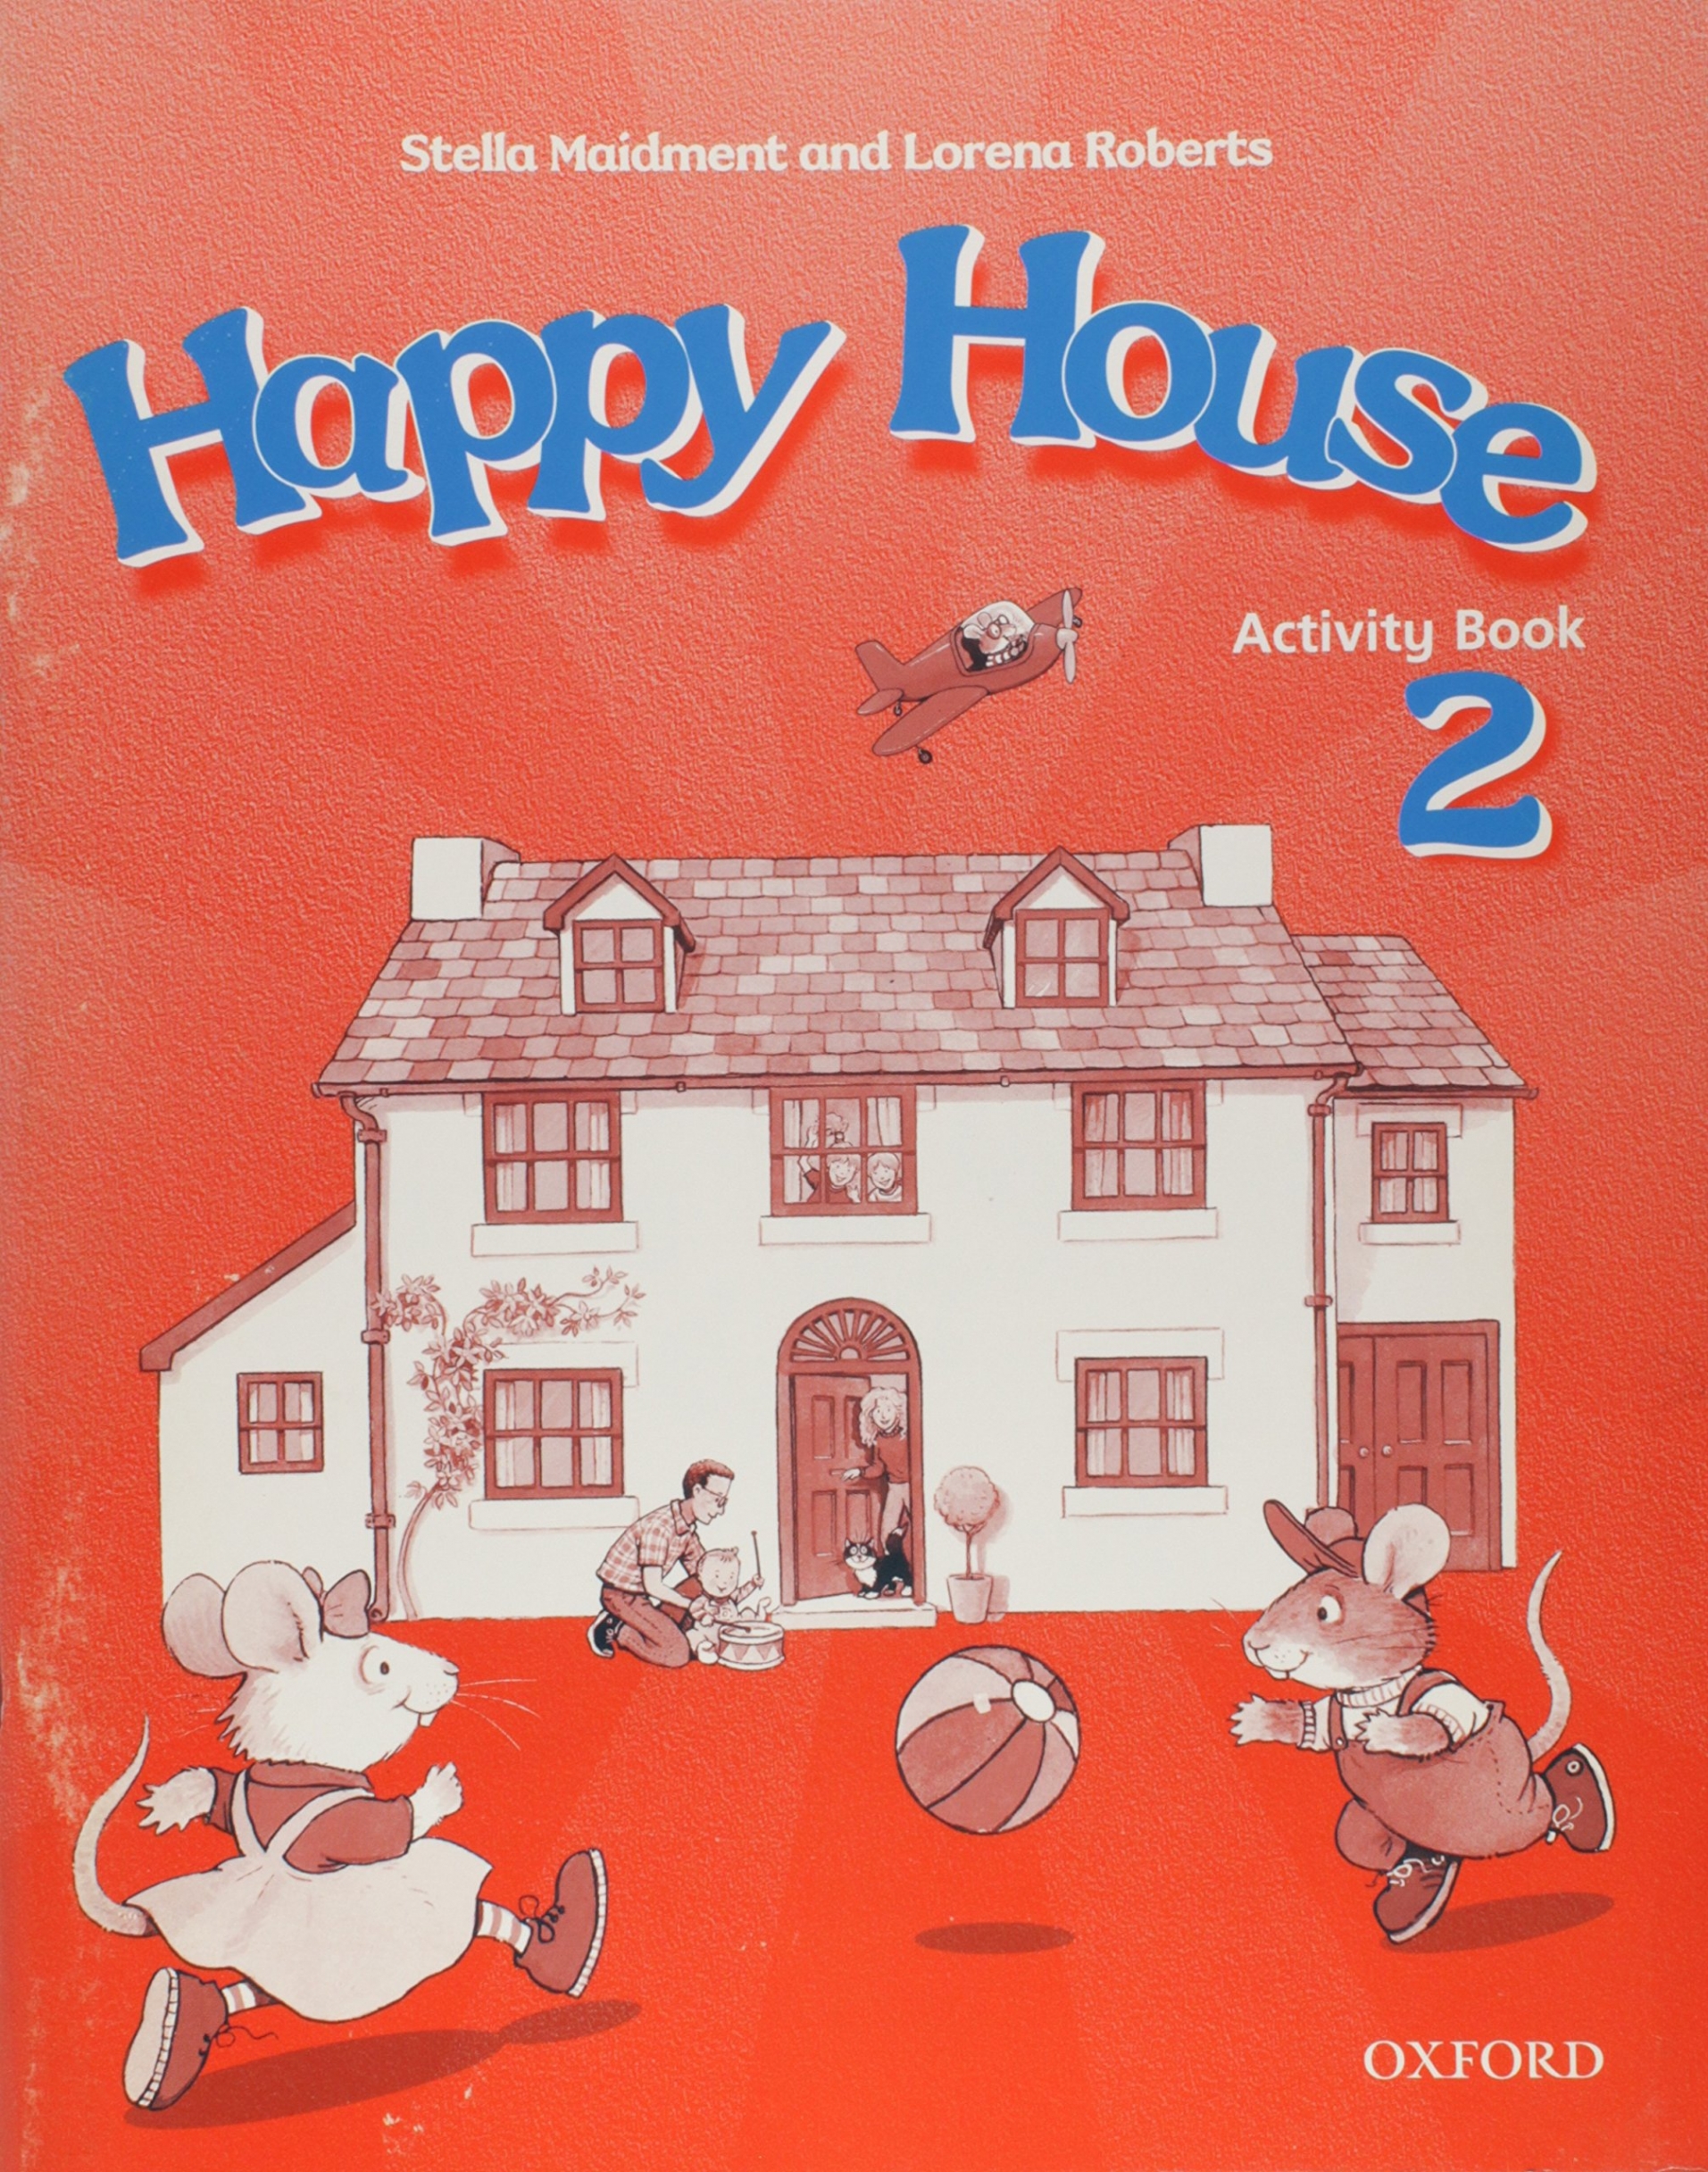 Stella Maidment and Lorena Roberts Happy House 2 Activity Book 